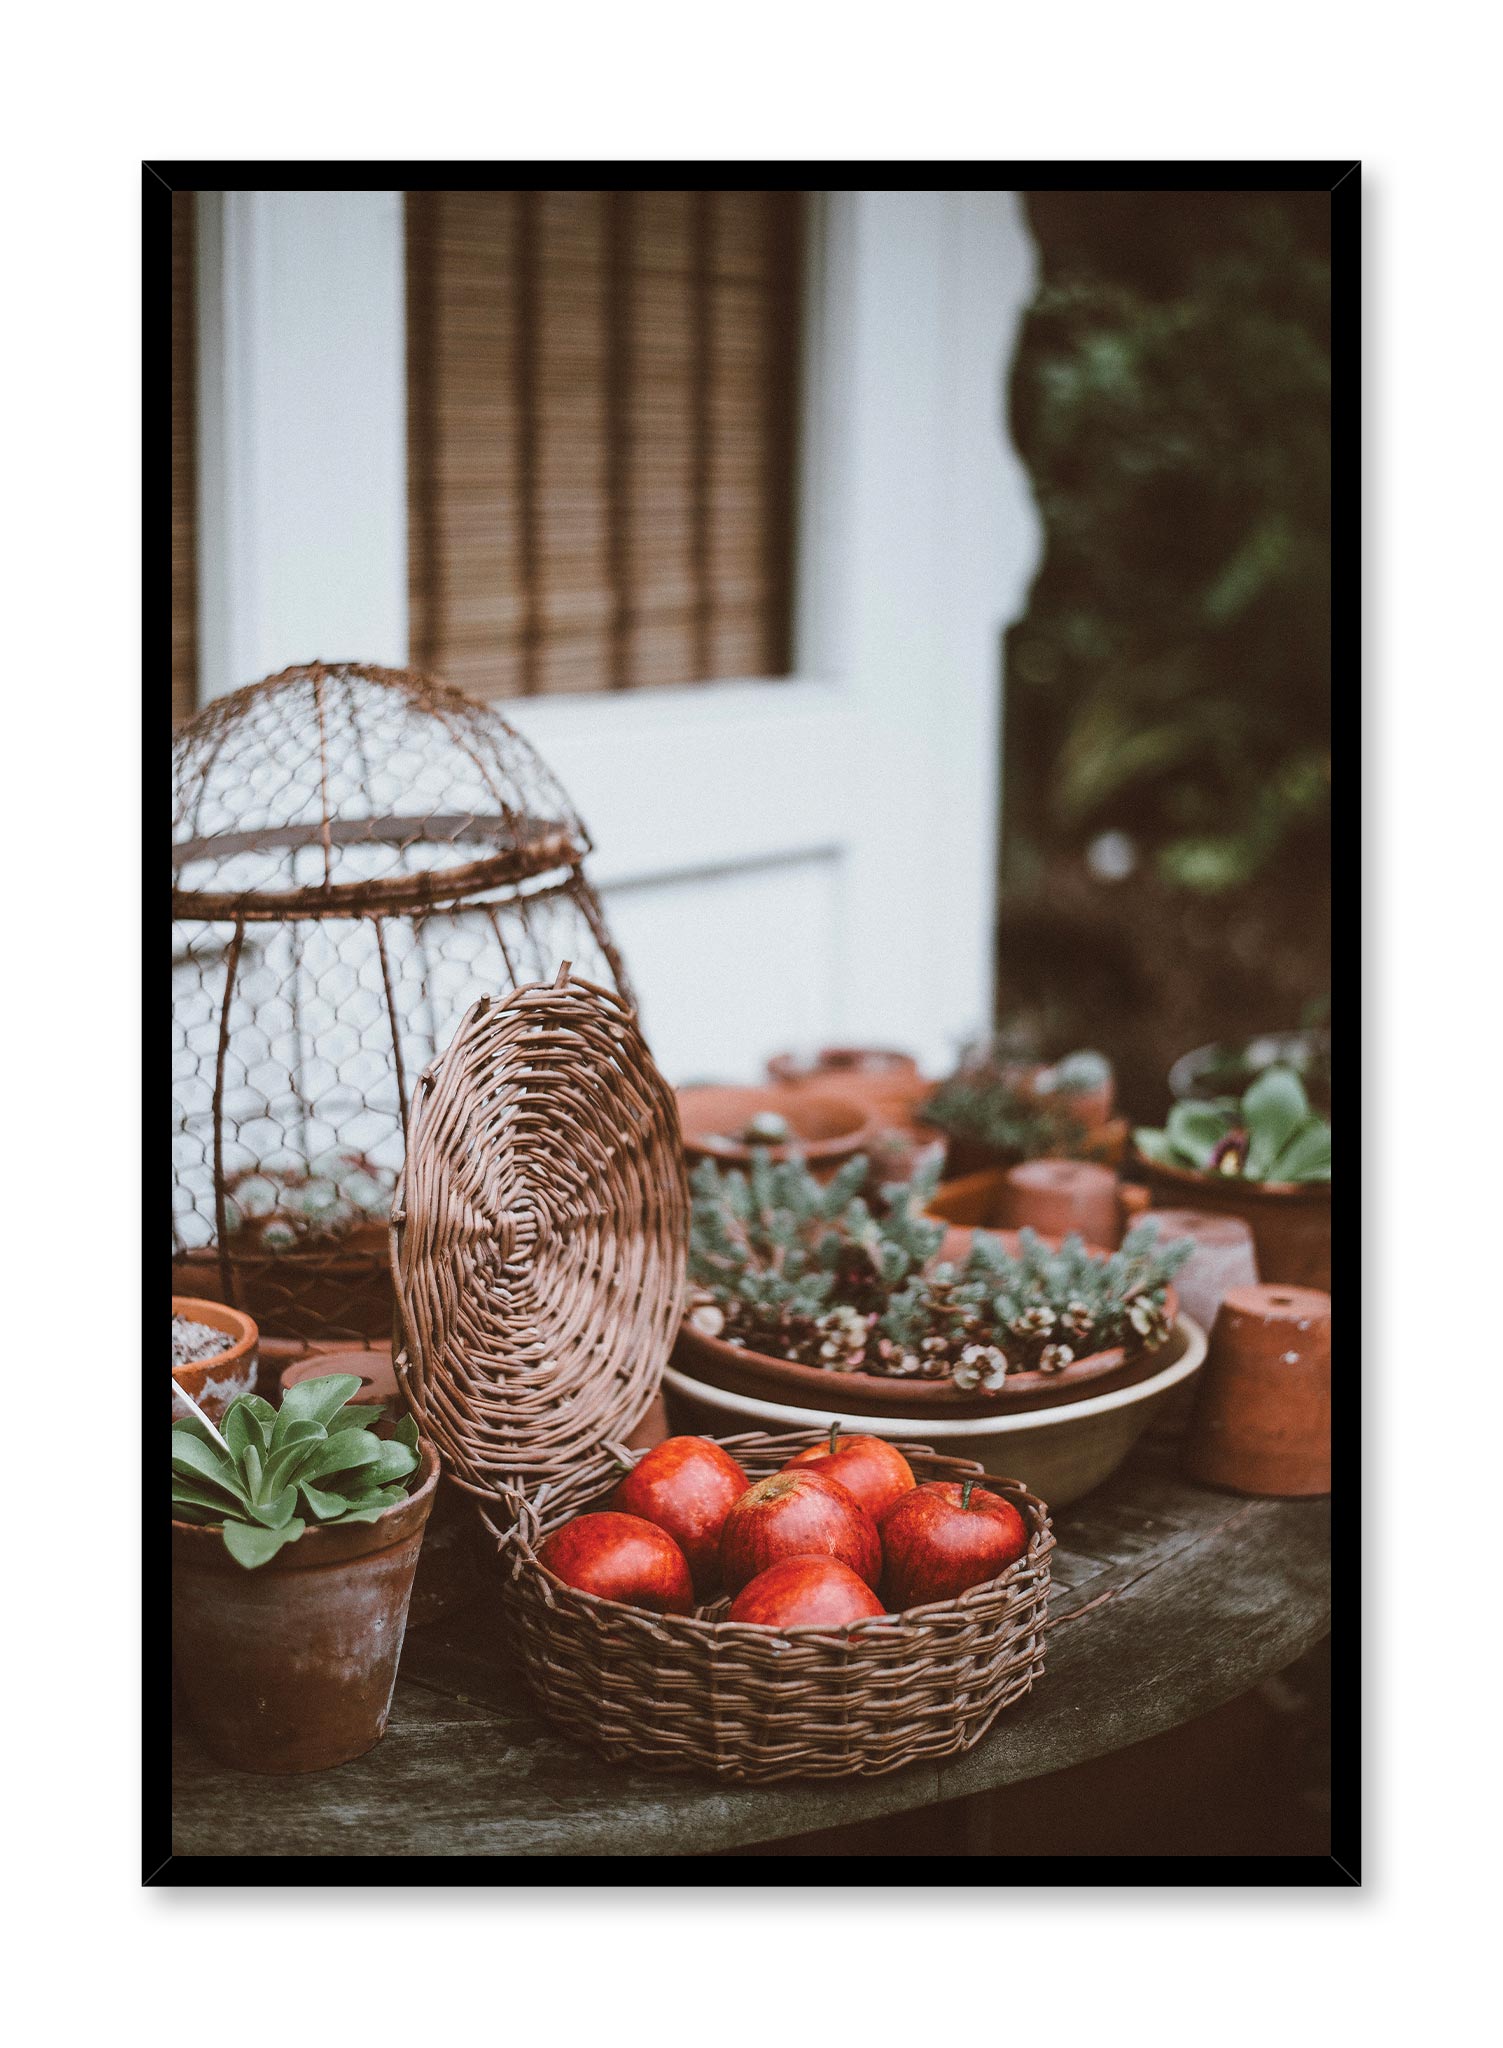 Apple Season is a minimalist photography by Opposite Wall of six harvested apple put in a basket container surrounded by small pots of succulents.